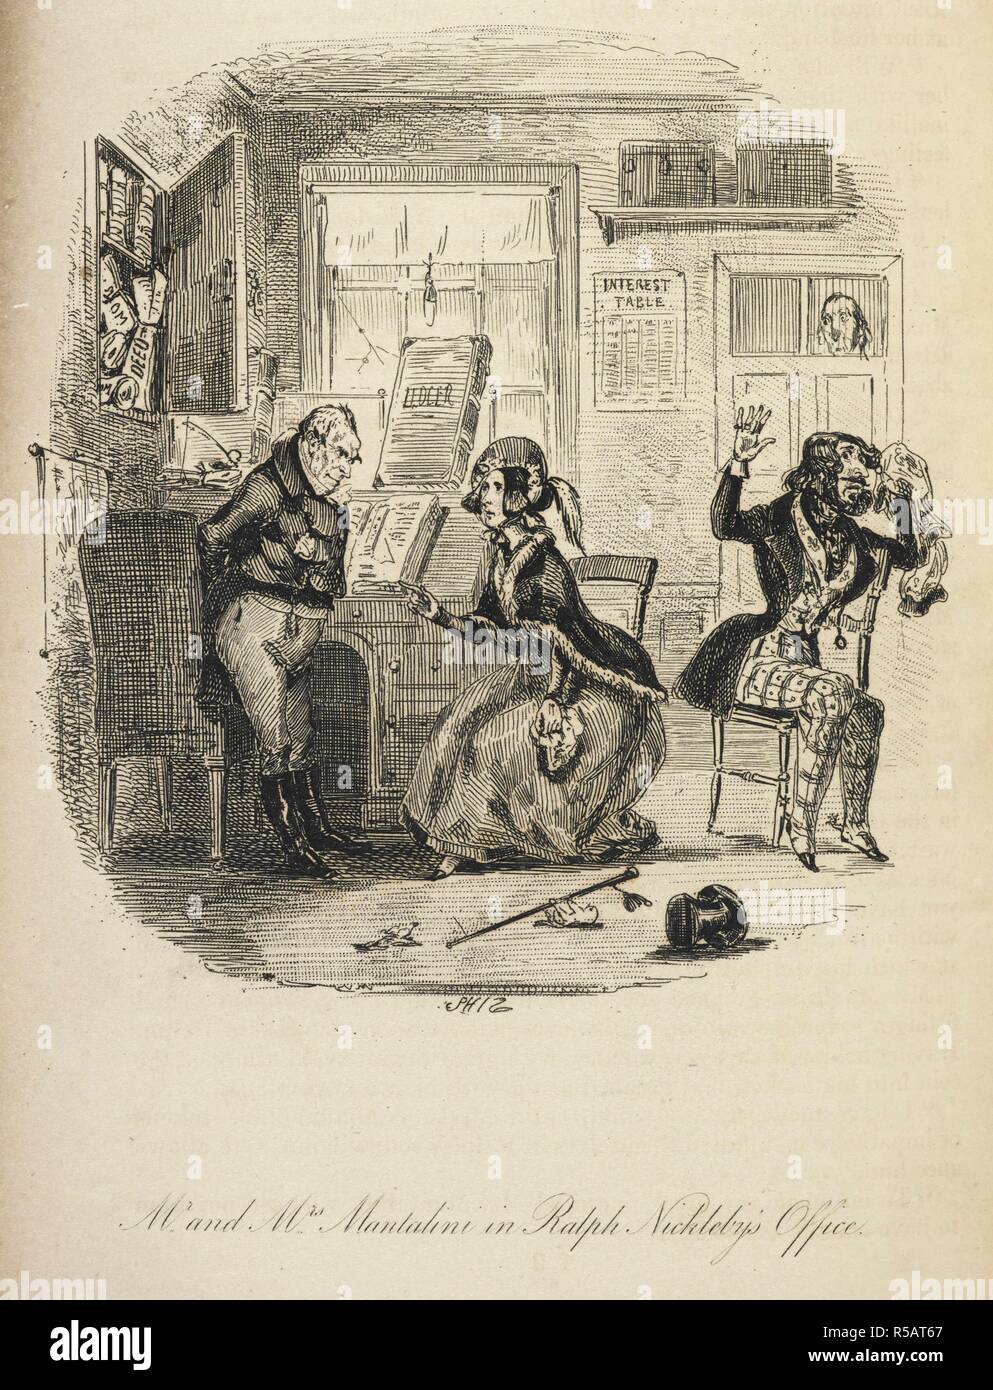 Illustration with the title 'Mr and Mrs Mantalini in Ralph Nickleby's office'. . The life and adventures of Nicholas Nickleby ... With illustrations by Phiz [and a portrait of the author by D. Maclise]. London: Chapman & Hall, 1839 [1838, 39]. Source: C.58.i.4 plate facing page 323. Language: English. Author: DICKENS, CHARLES. Hablot Knight Browne Phiz. Stock Photo